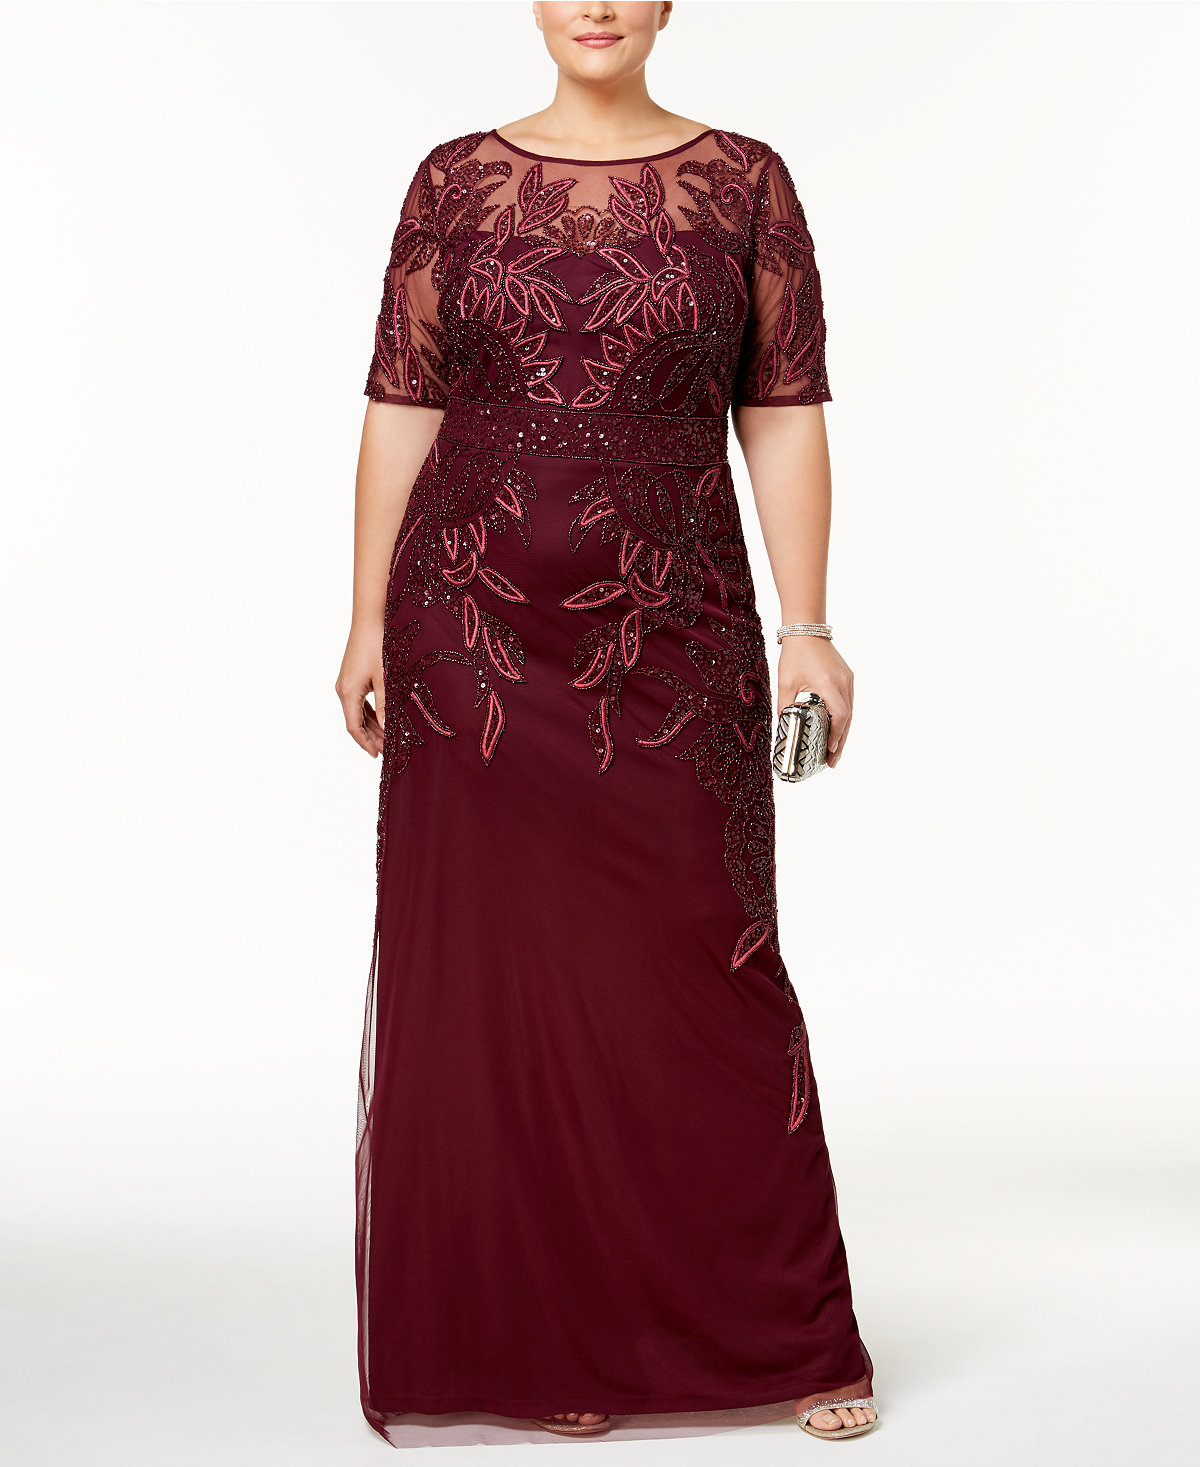 https://www.macys.com/shop/product/adrianna-papell-plus-size-embroidered-mesh-gown?ID=5333324&CategoryID=37038#fn=sp%3D1%26spc%3D1100%26ruleId%3D87%7CBOOST%20SAVED%20SET%7CBOOST%20ATTRIBUTE%26searchPass%3DmatchNone%26slotId%3D31